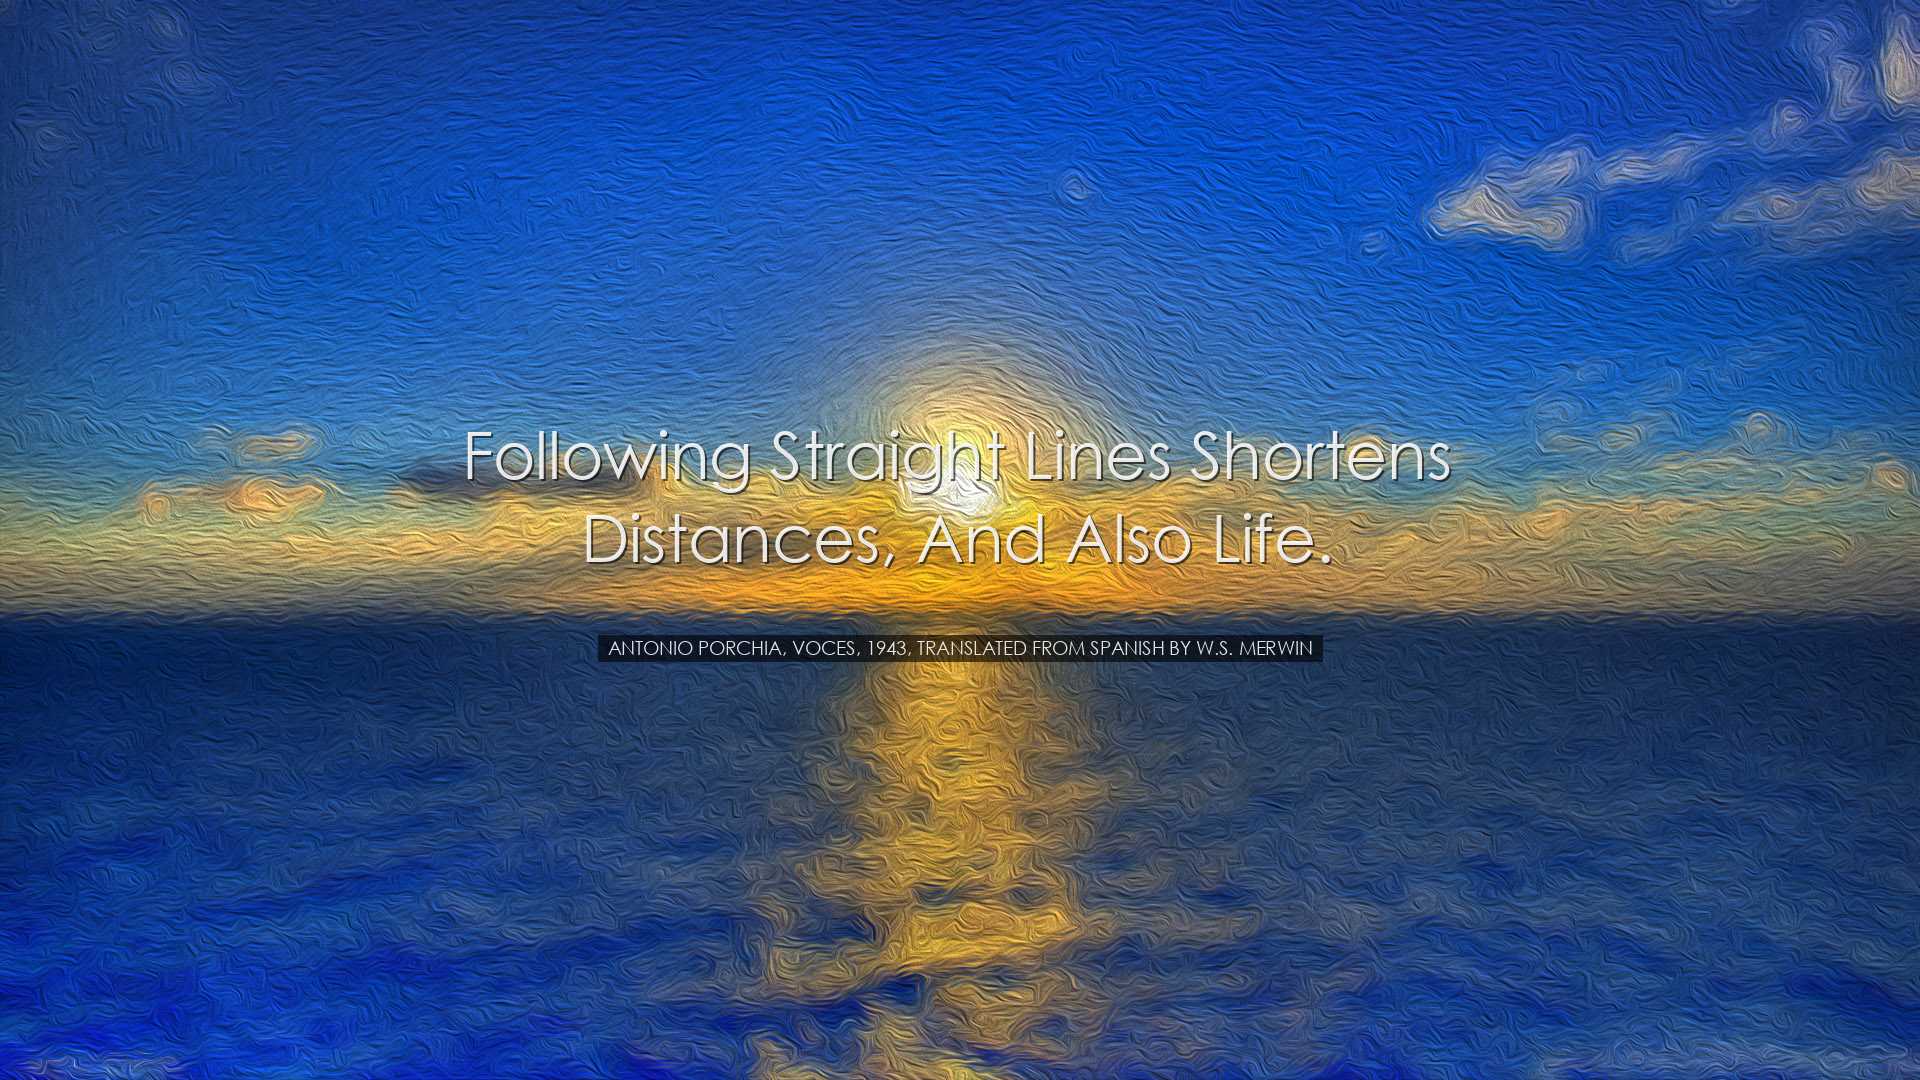 Following straight lines shortens distances, and also life. - Anto